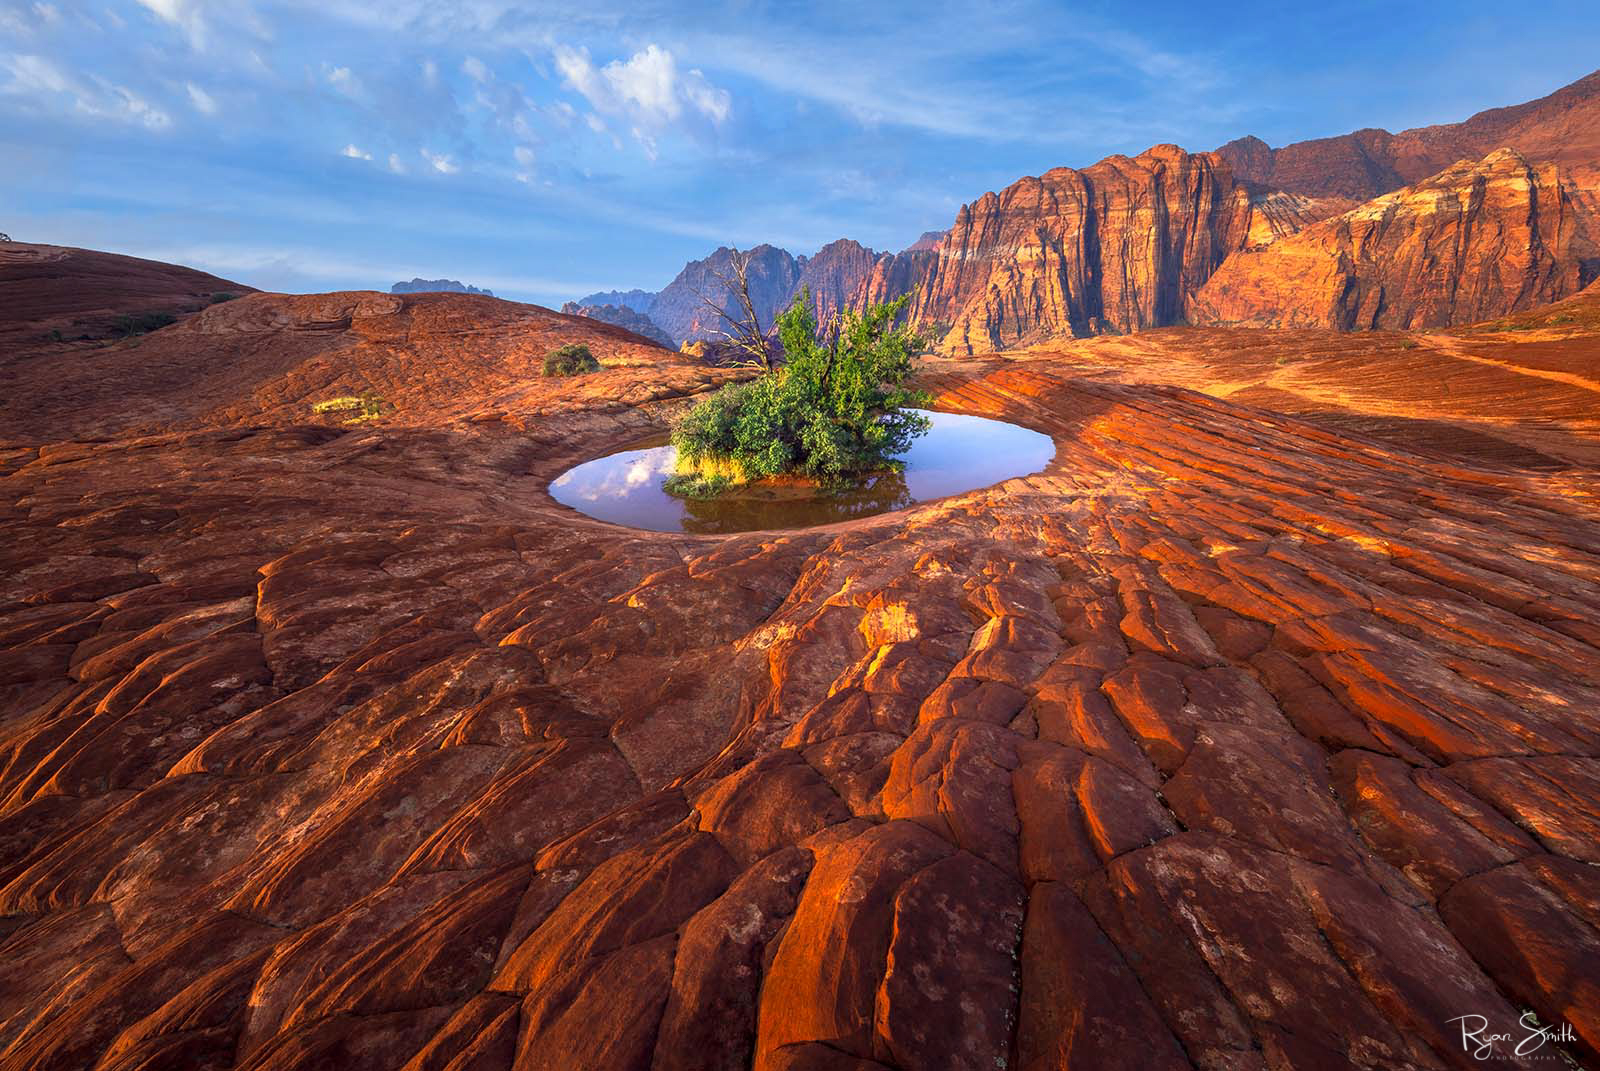 A large puddle of water has a green bush growing in the center of it in a rocky desert scene being hit by light from setting sun & mountains in the background.